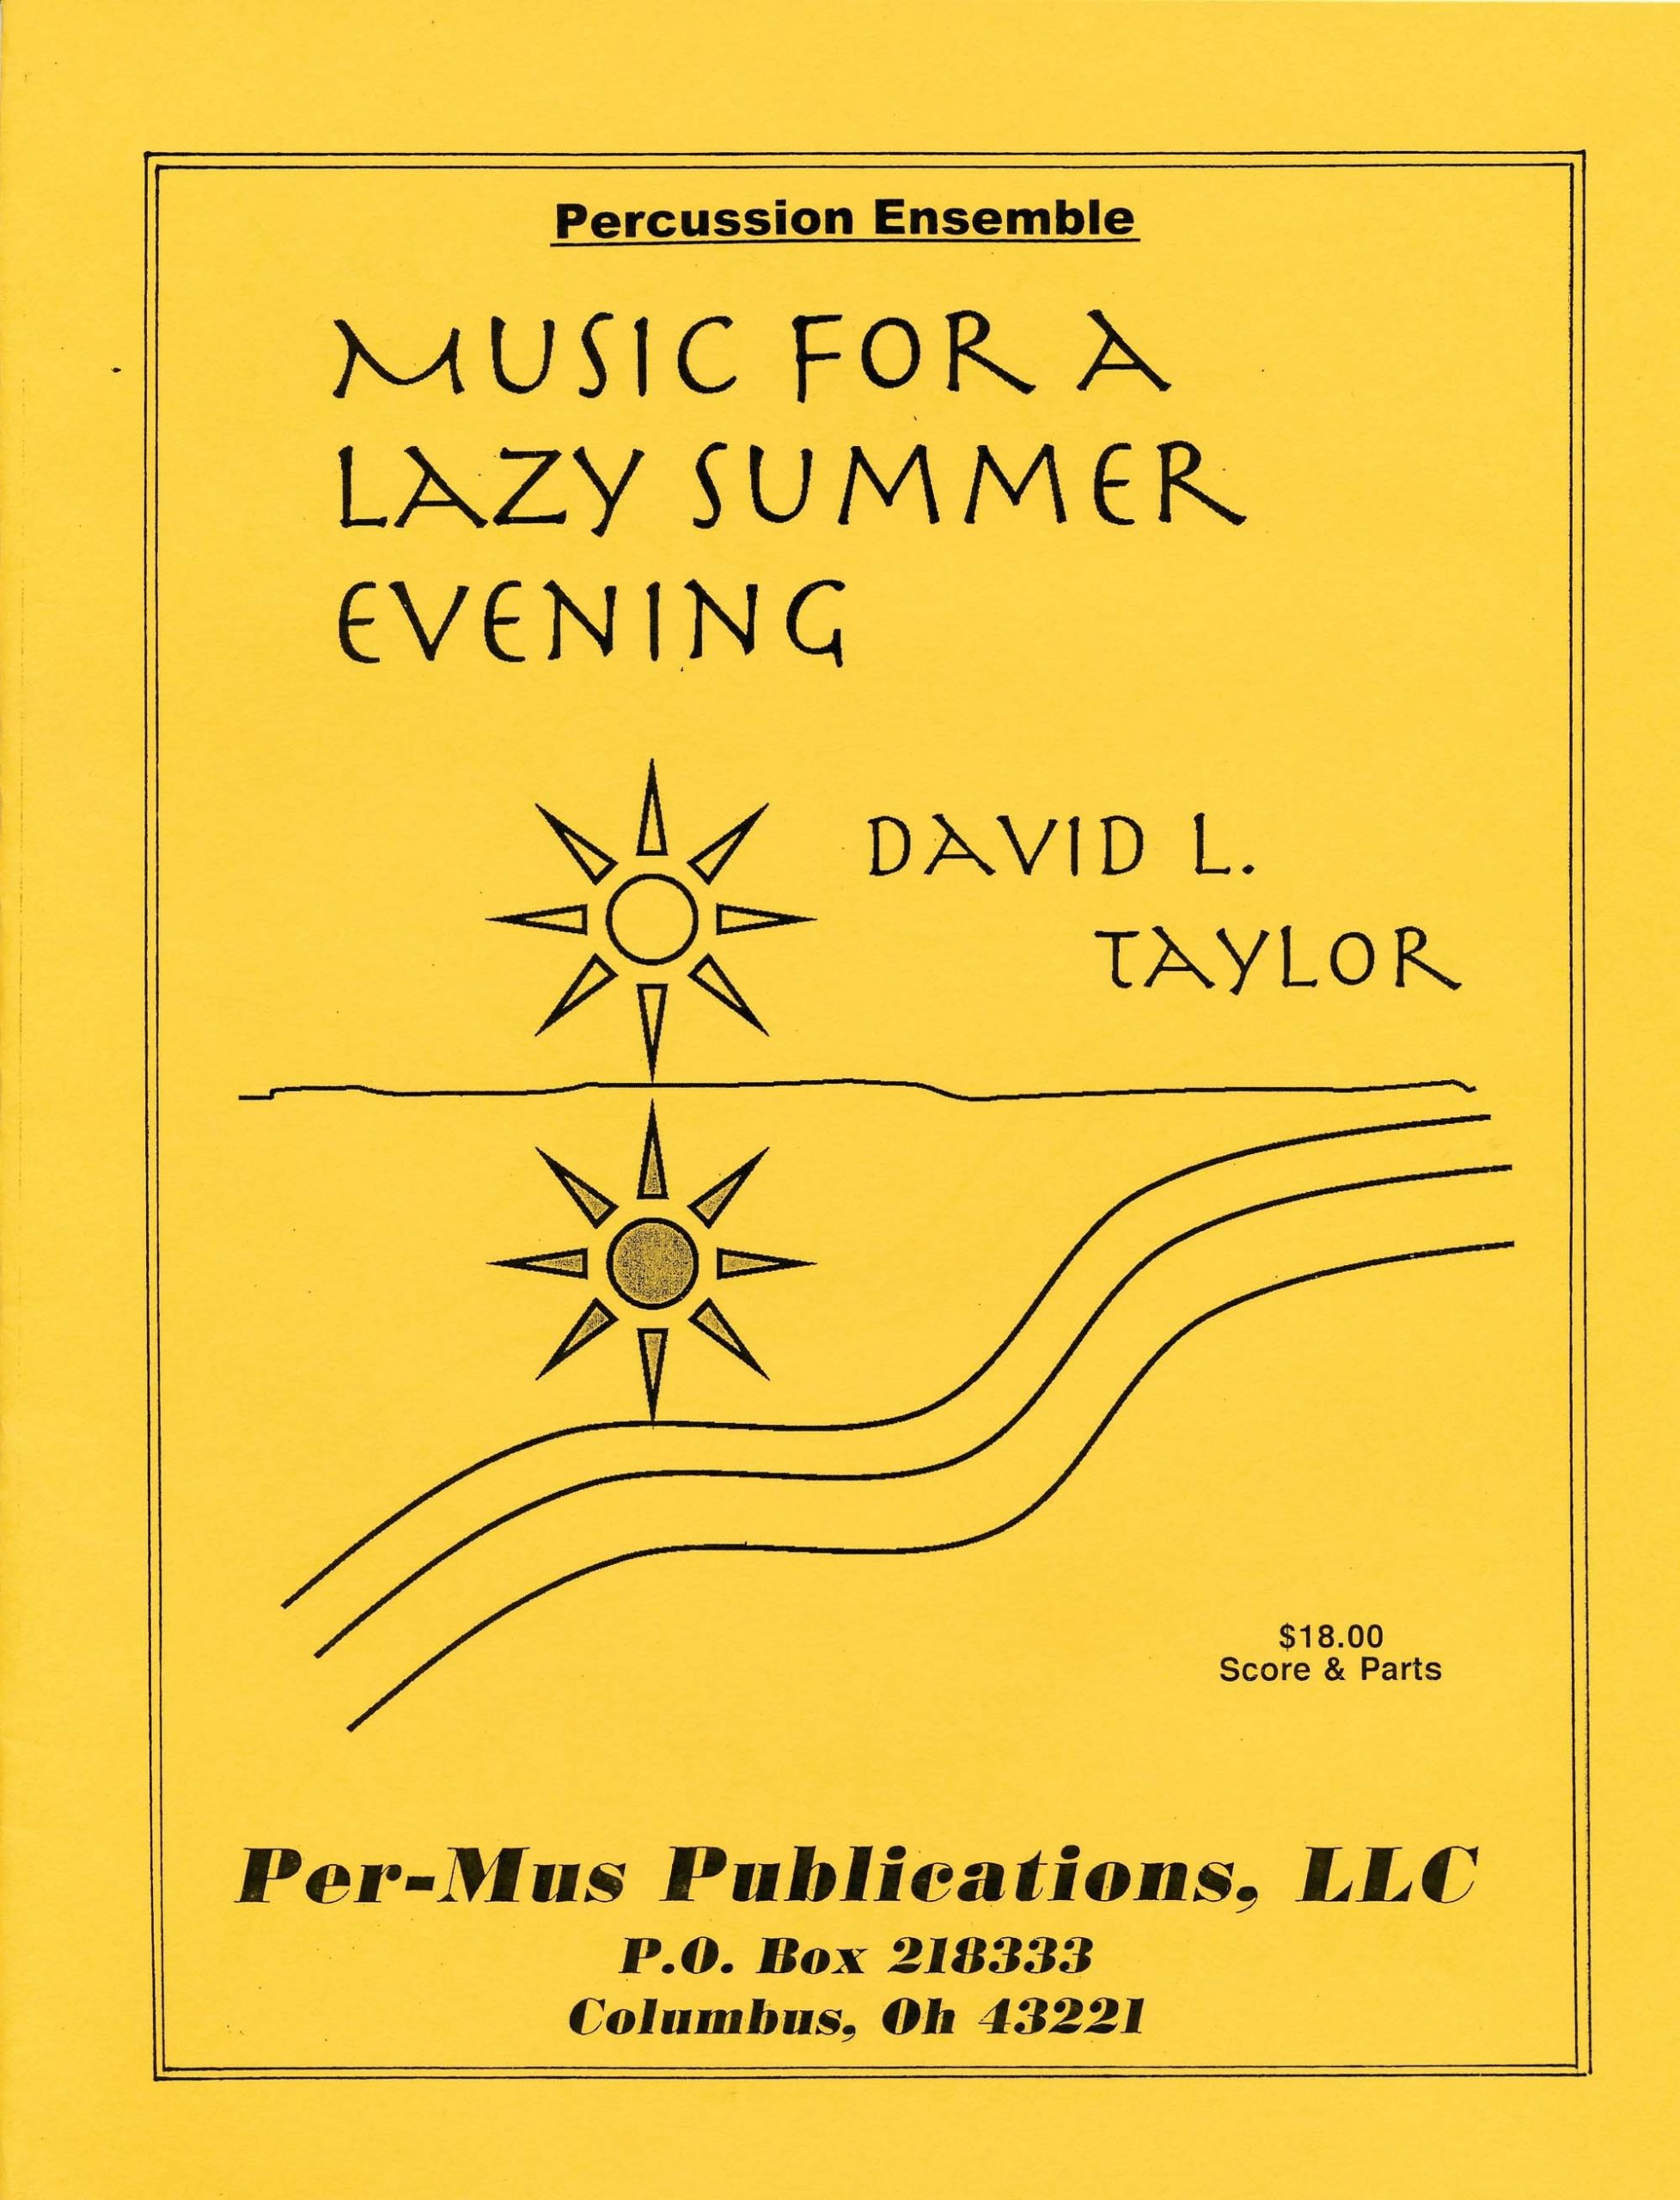 Music for a Lazy Summer Evening by David Taylor